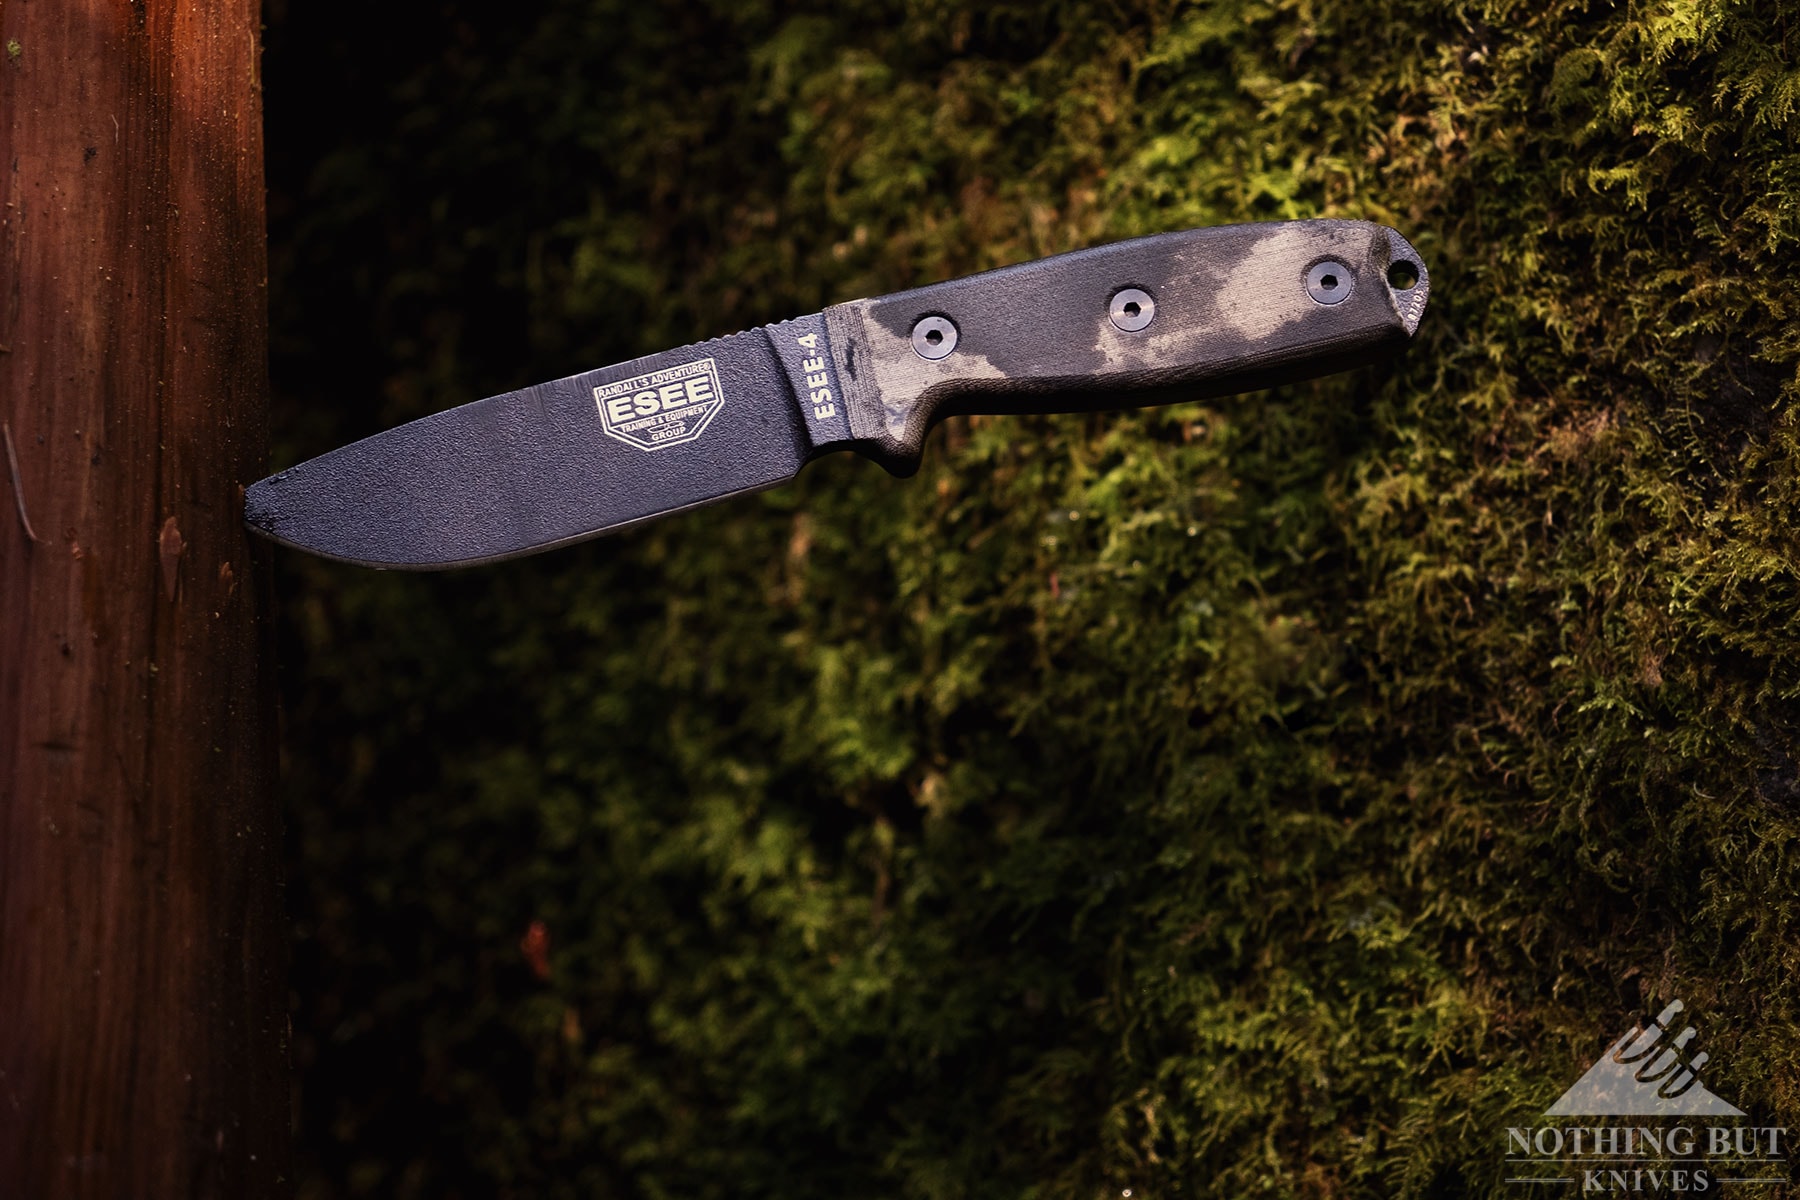 The Esee 4 is a great horizontal carry knife when it is ordered with the molle sheath option. 